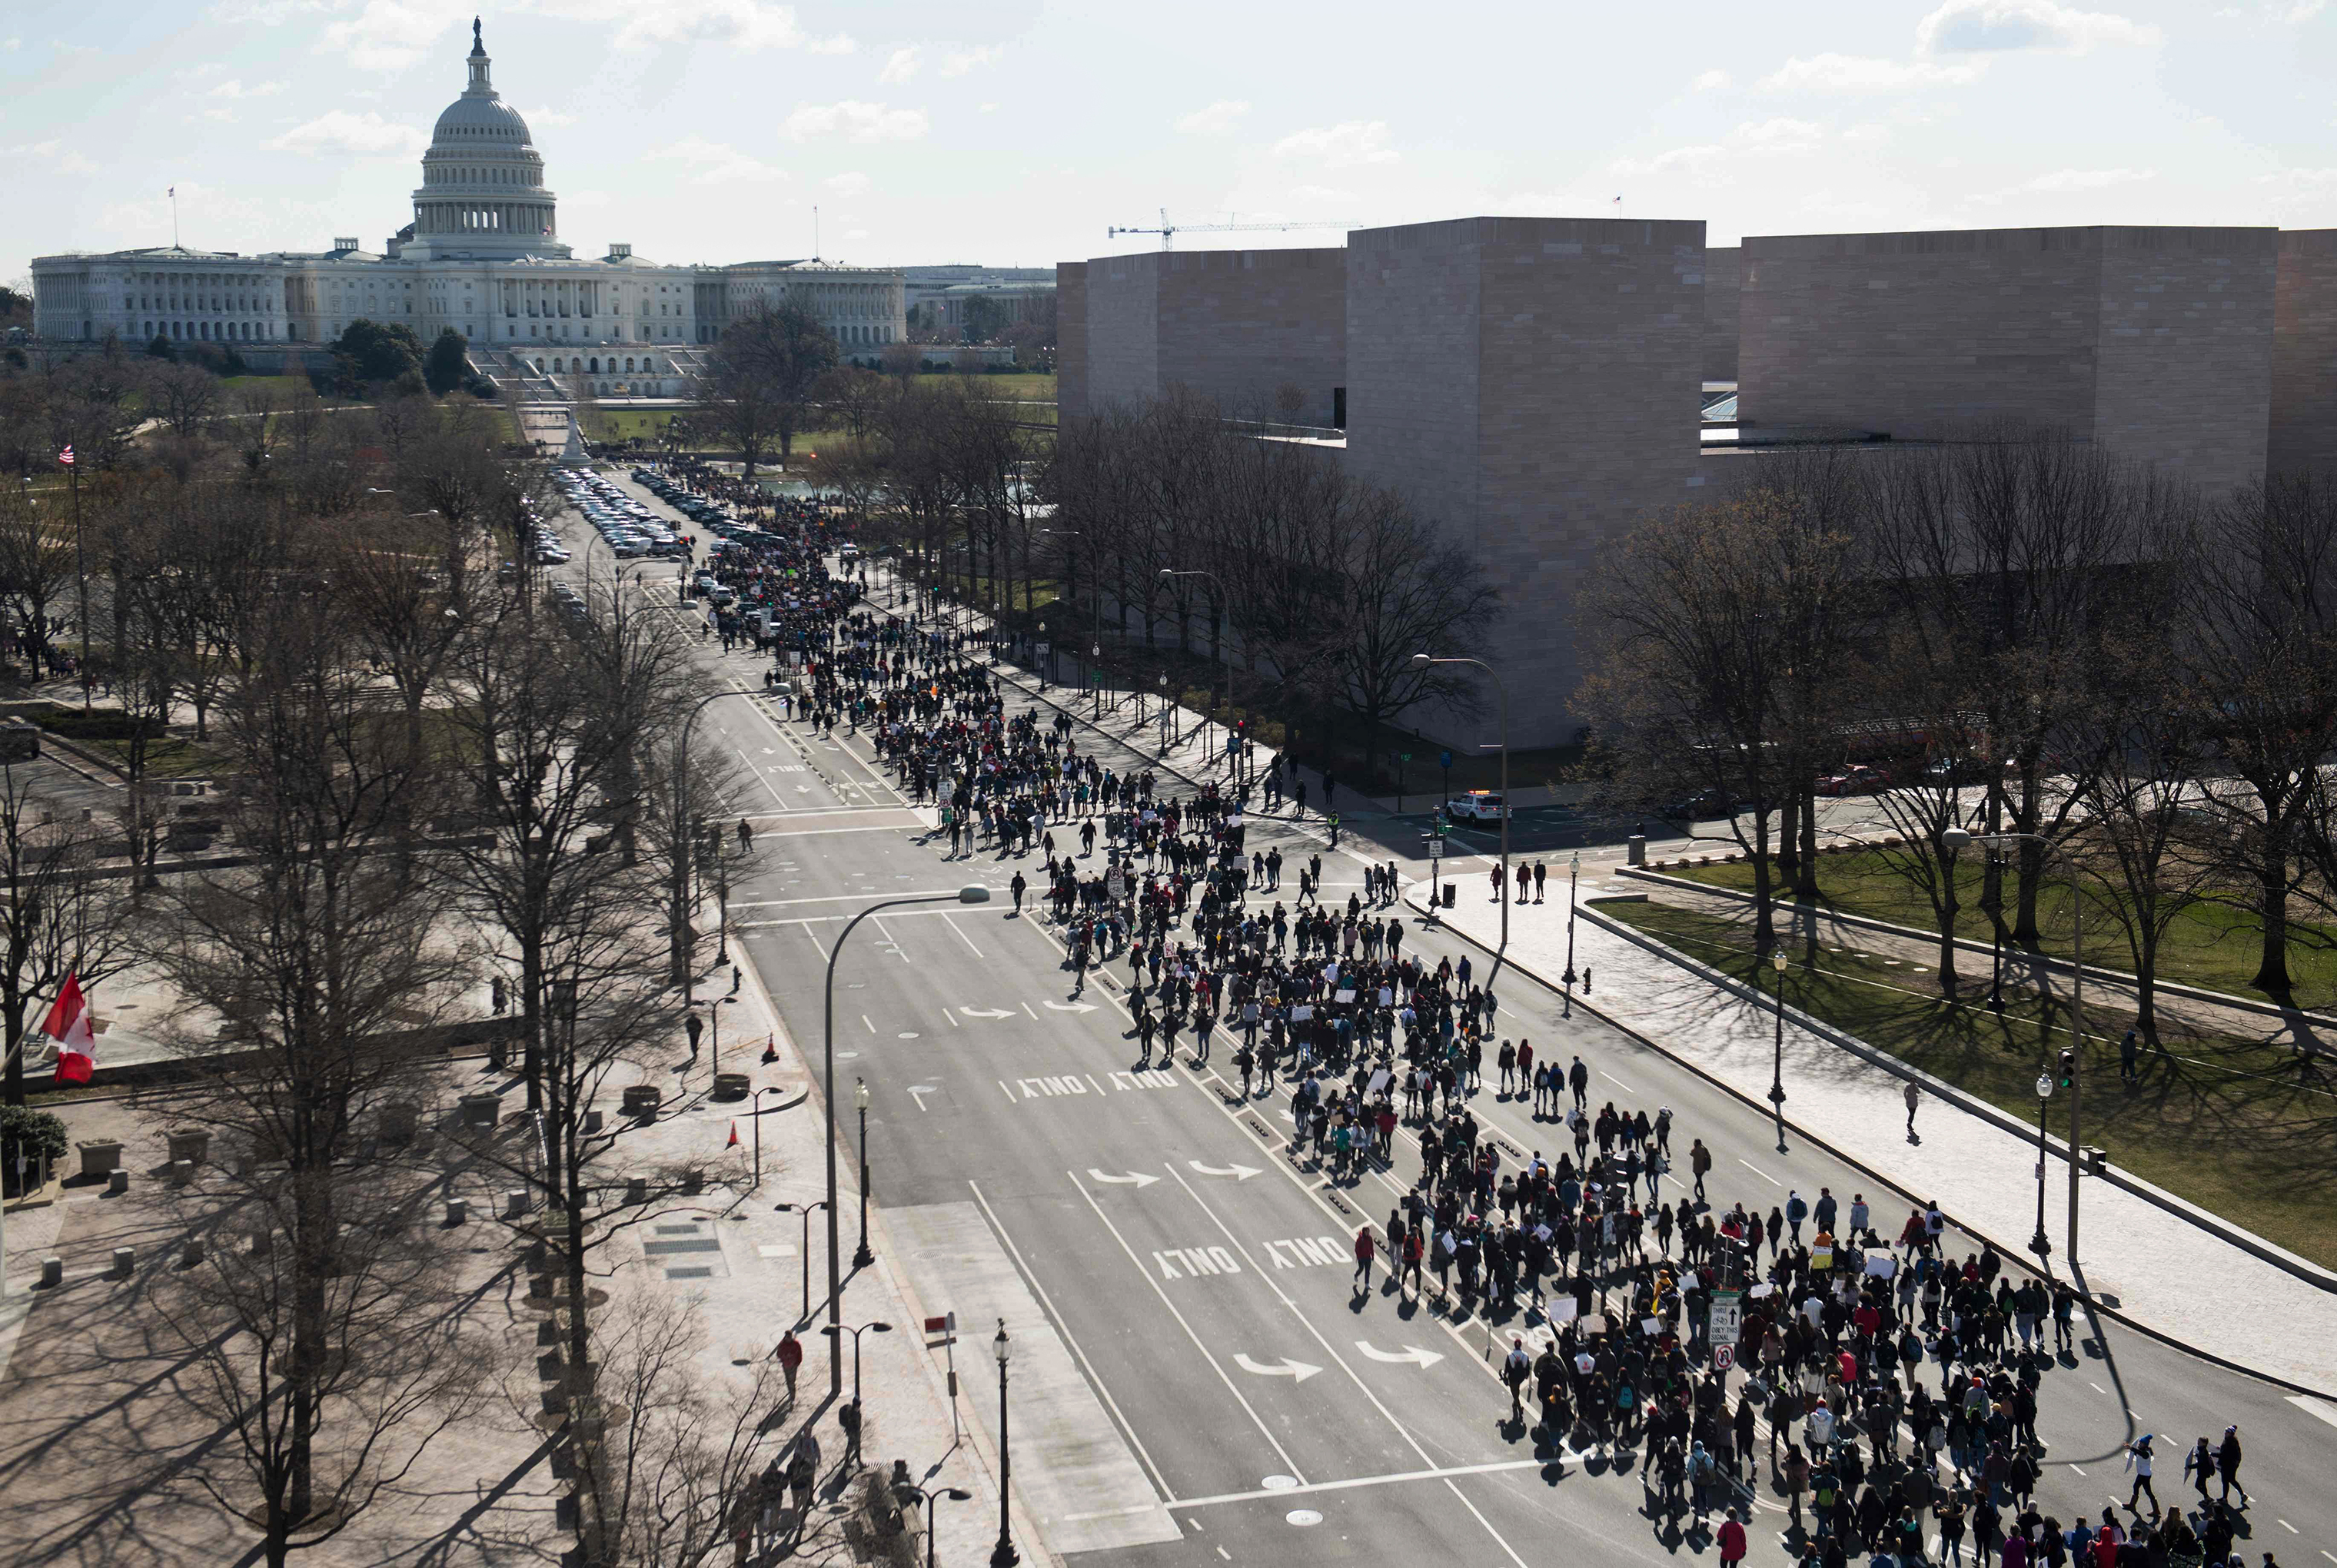 Thousands of local students march down Pennsylvania Avenue to the US Capitol during a nationwide student walkout for gun control in Washington, DC, March 14, 2018. (Saul Loeb—AFP/Getty Images)